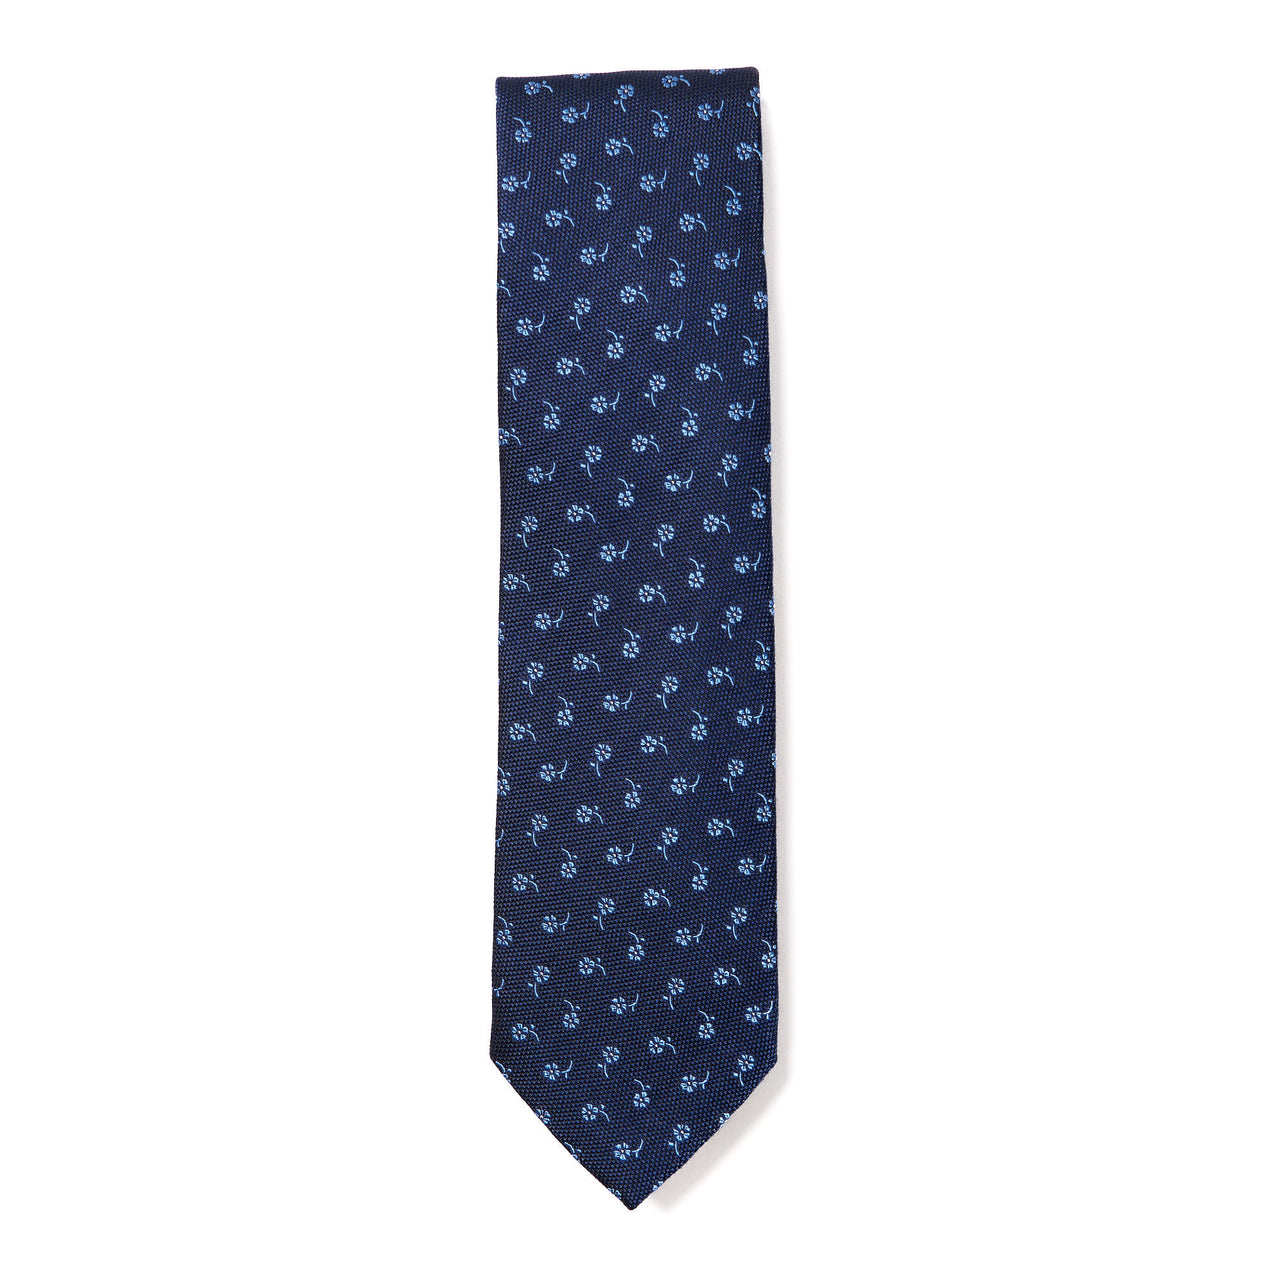 HENRY SARTORIAL X CANTINI Floral Tie NAVY/BLUE